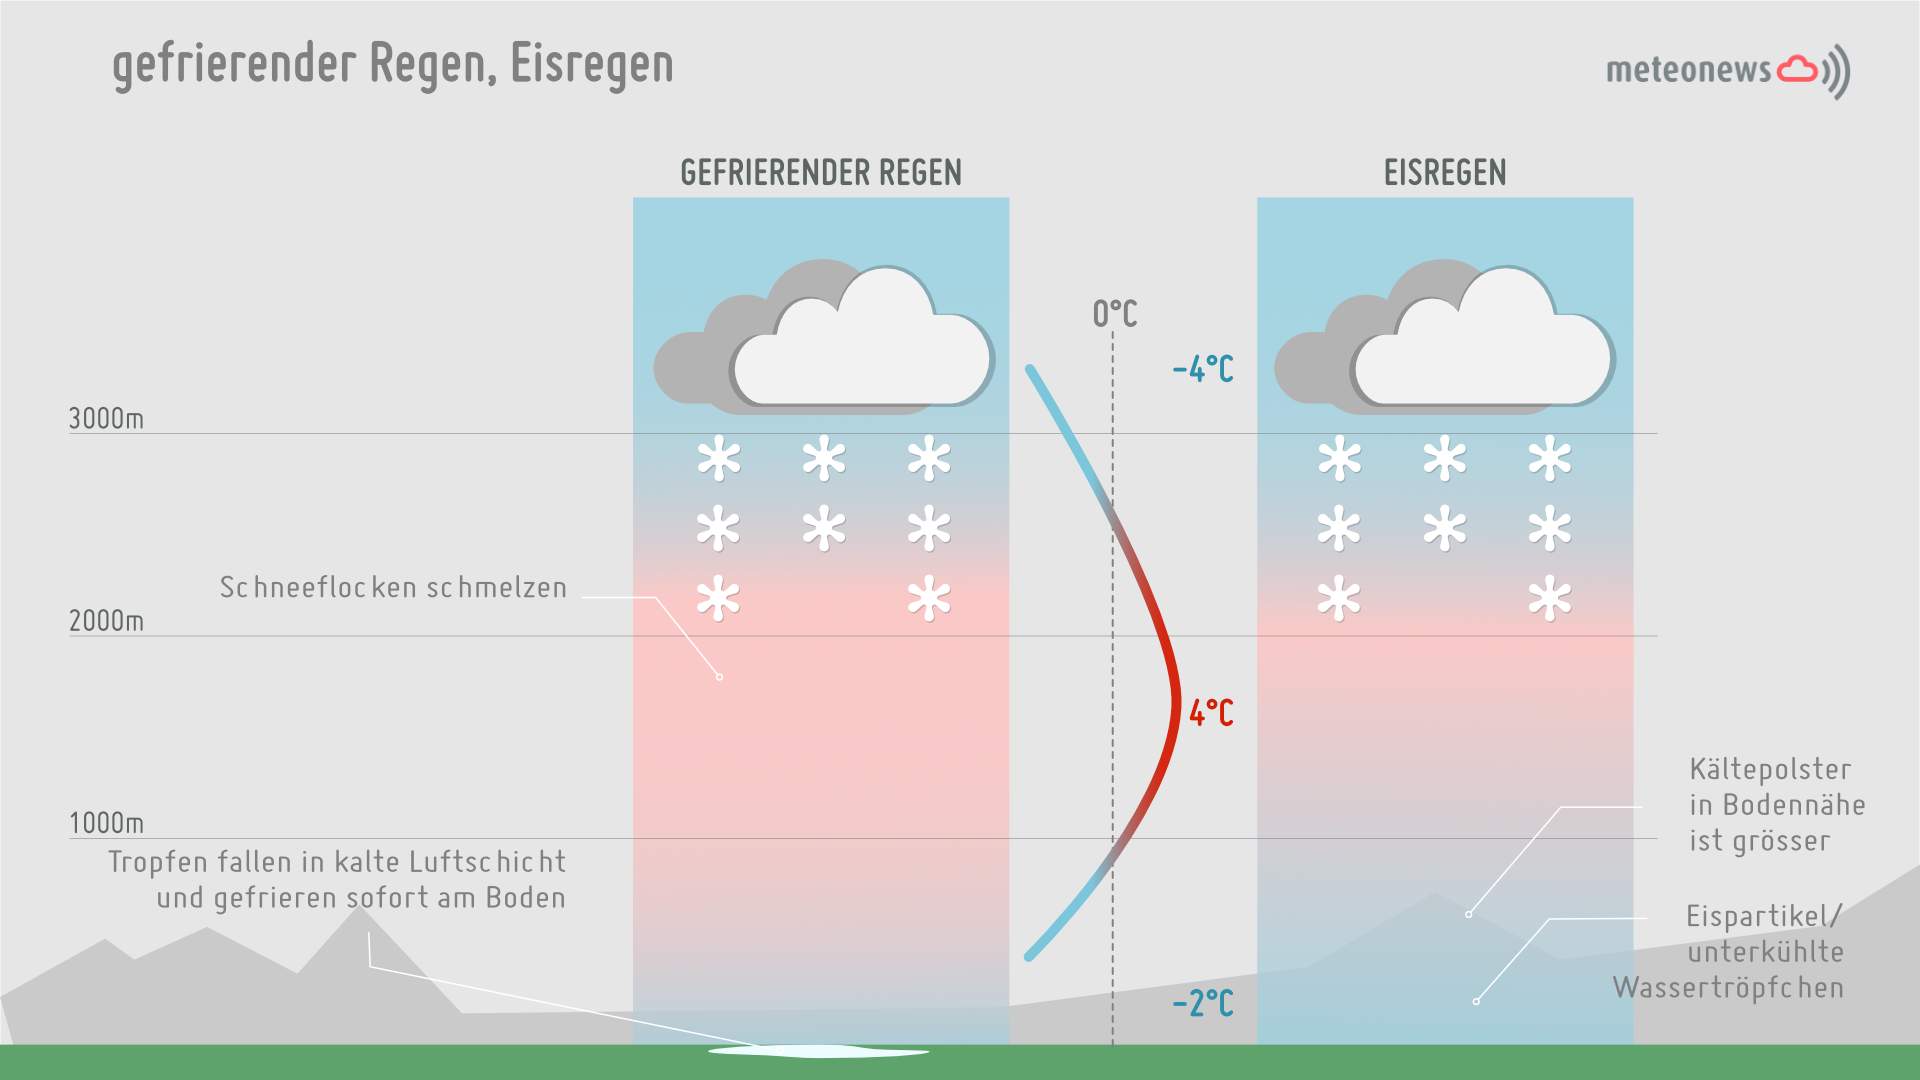 Fig. 3: Schematic representation of freezing rain (left) and freezing rain (right); Source: MeteoNews